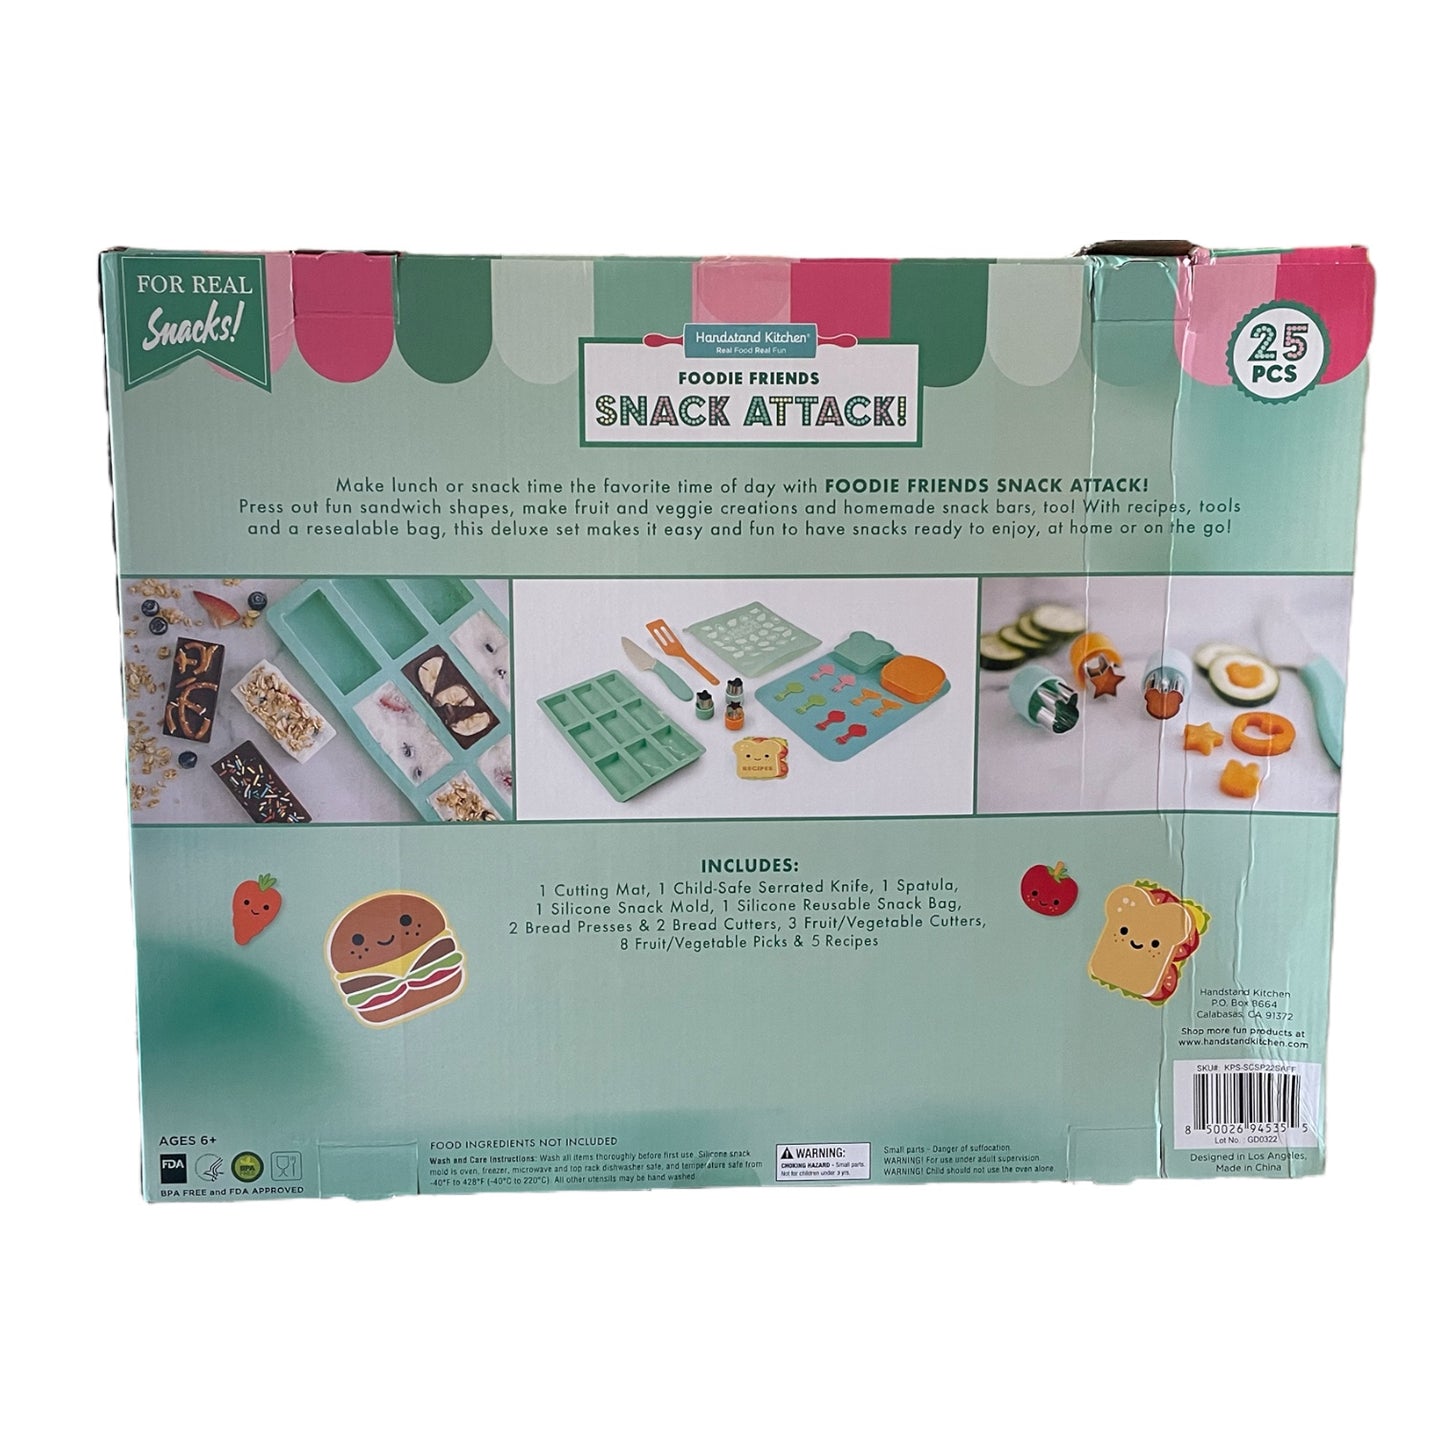 Snack Attack! 25 Piece Kids Food Prep Set for Real Foods, Foodie Friends